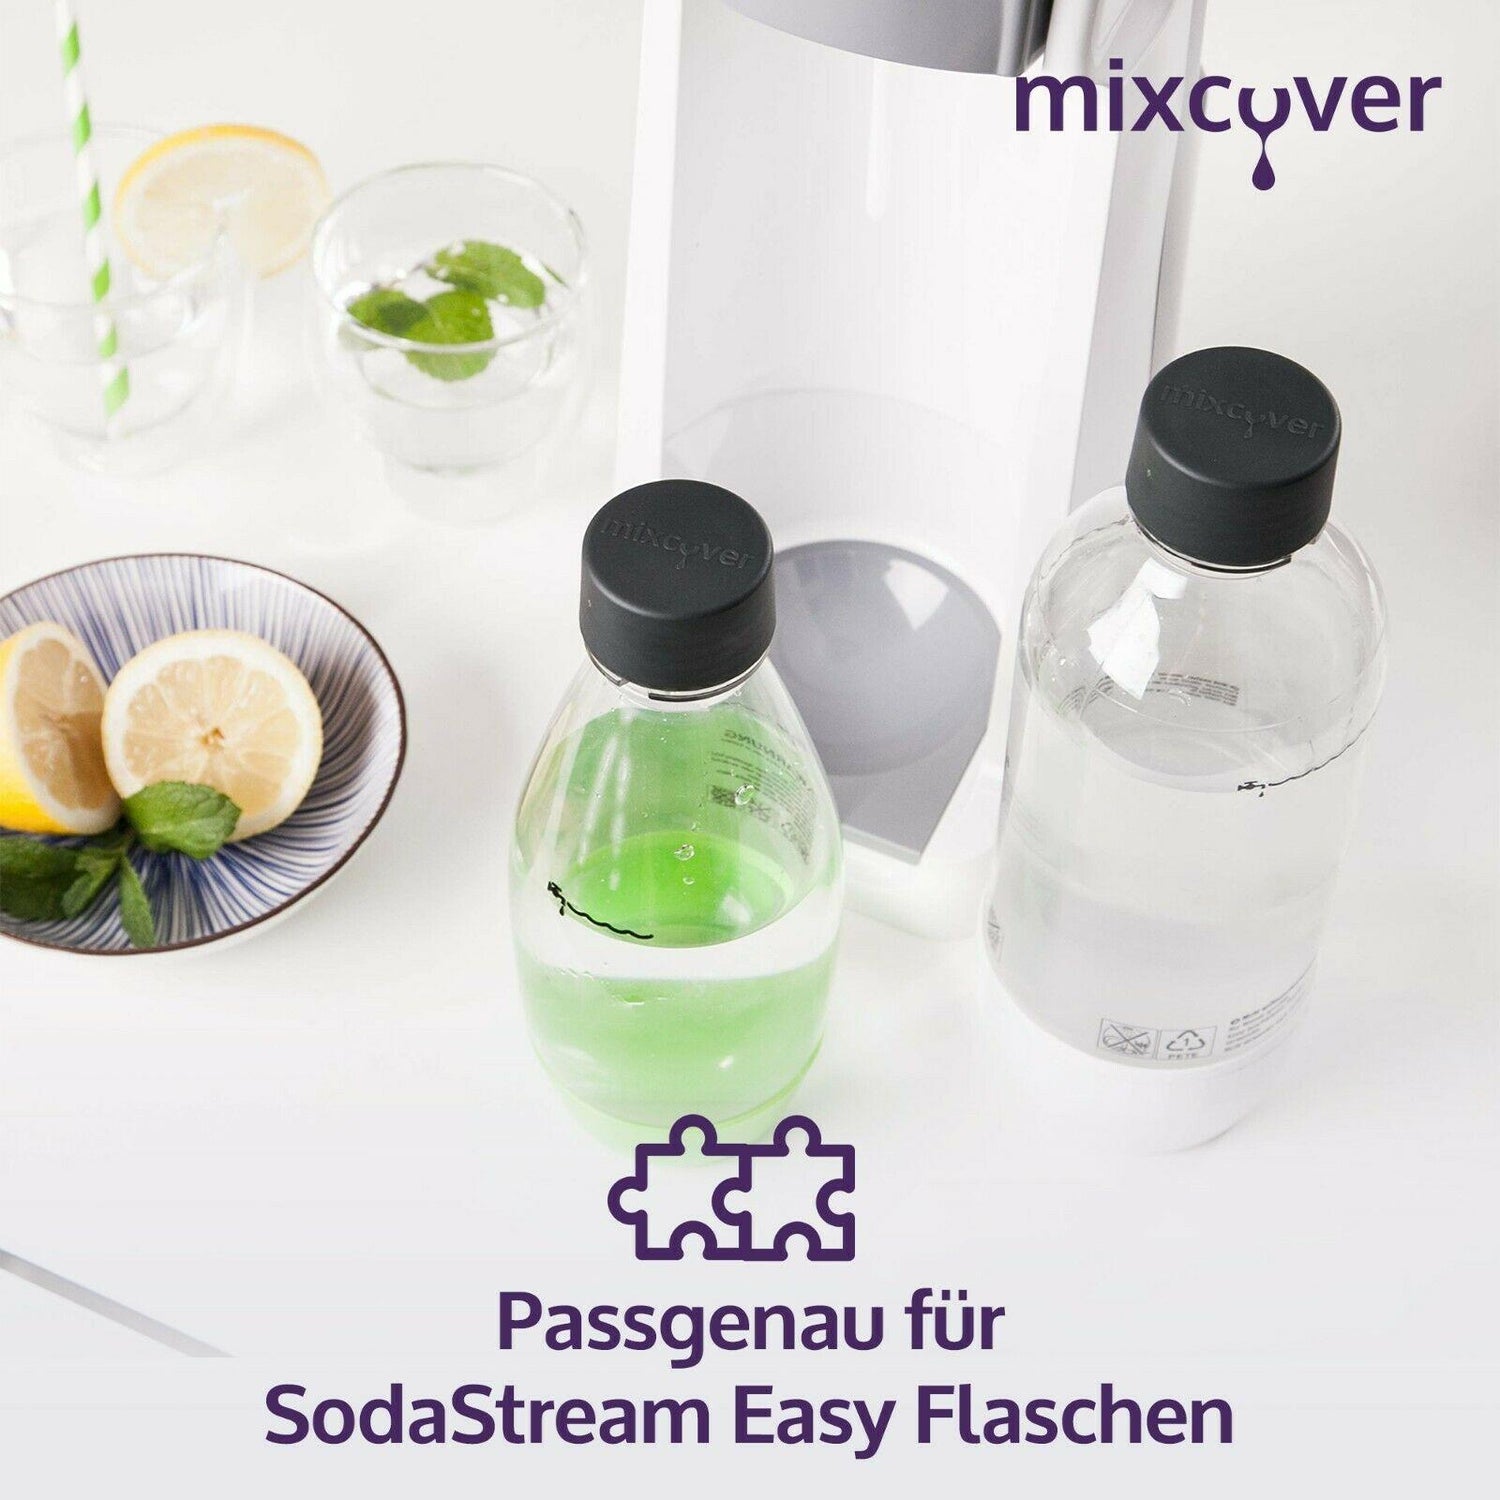 mixcover Replacement lid suitable for sodastream PET plastic bottles 1er set